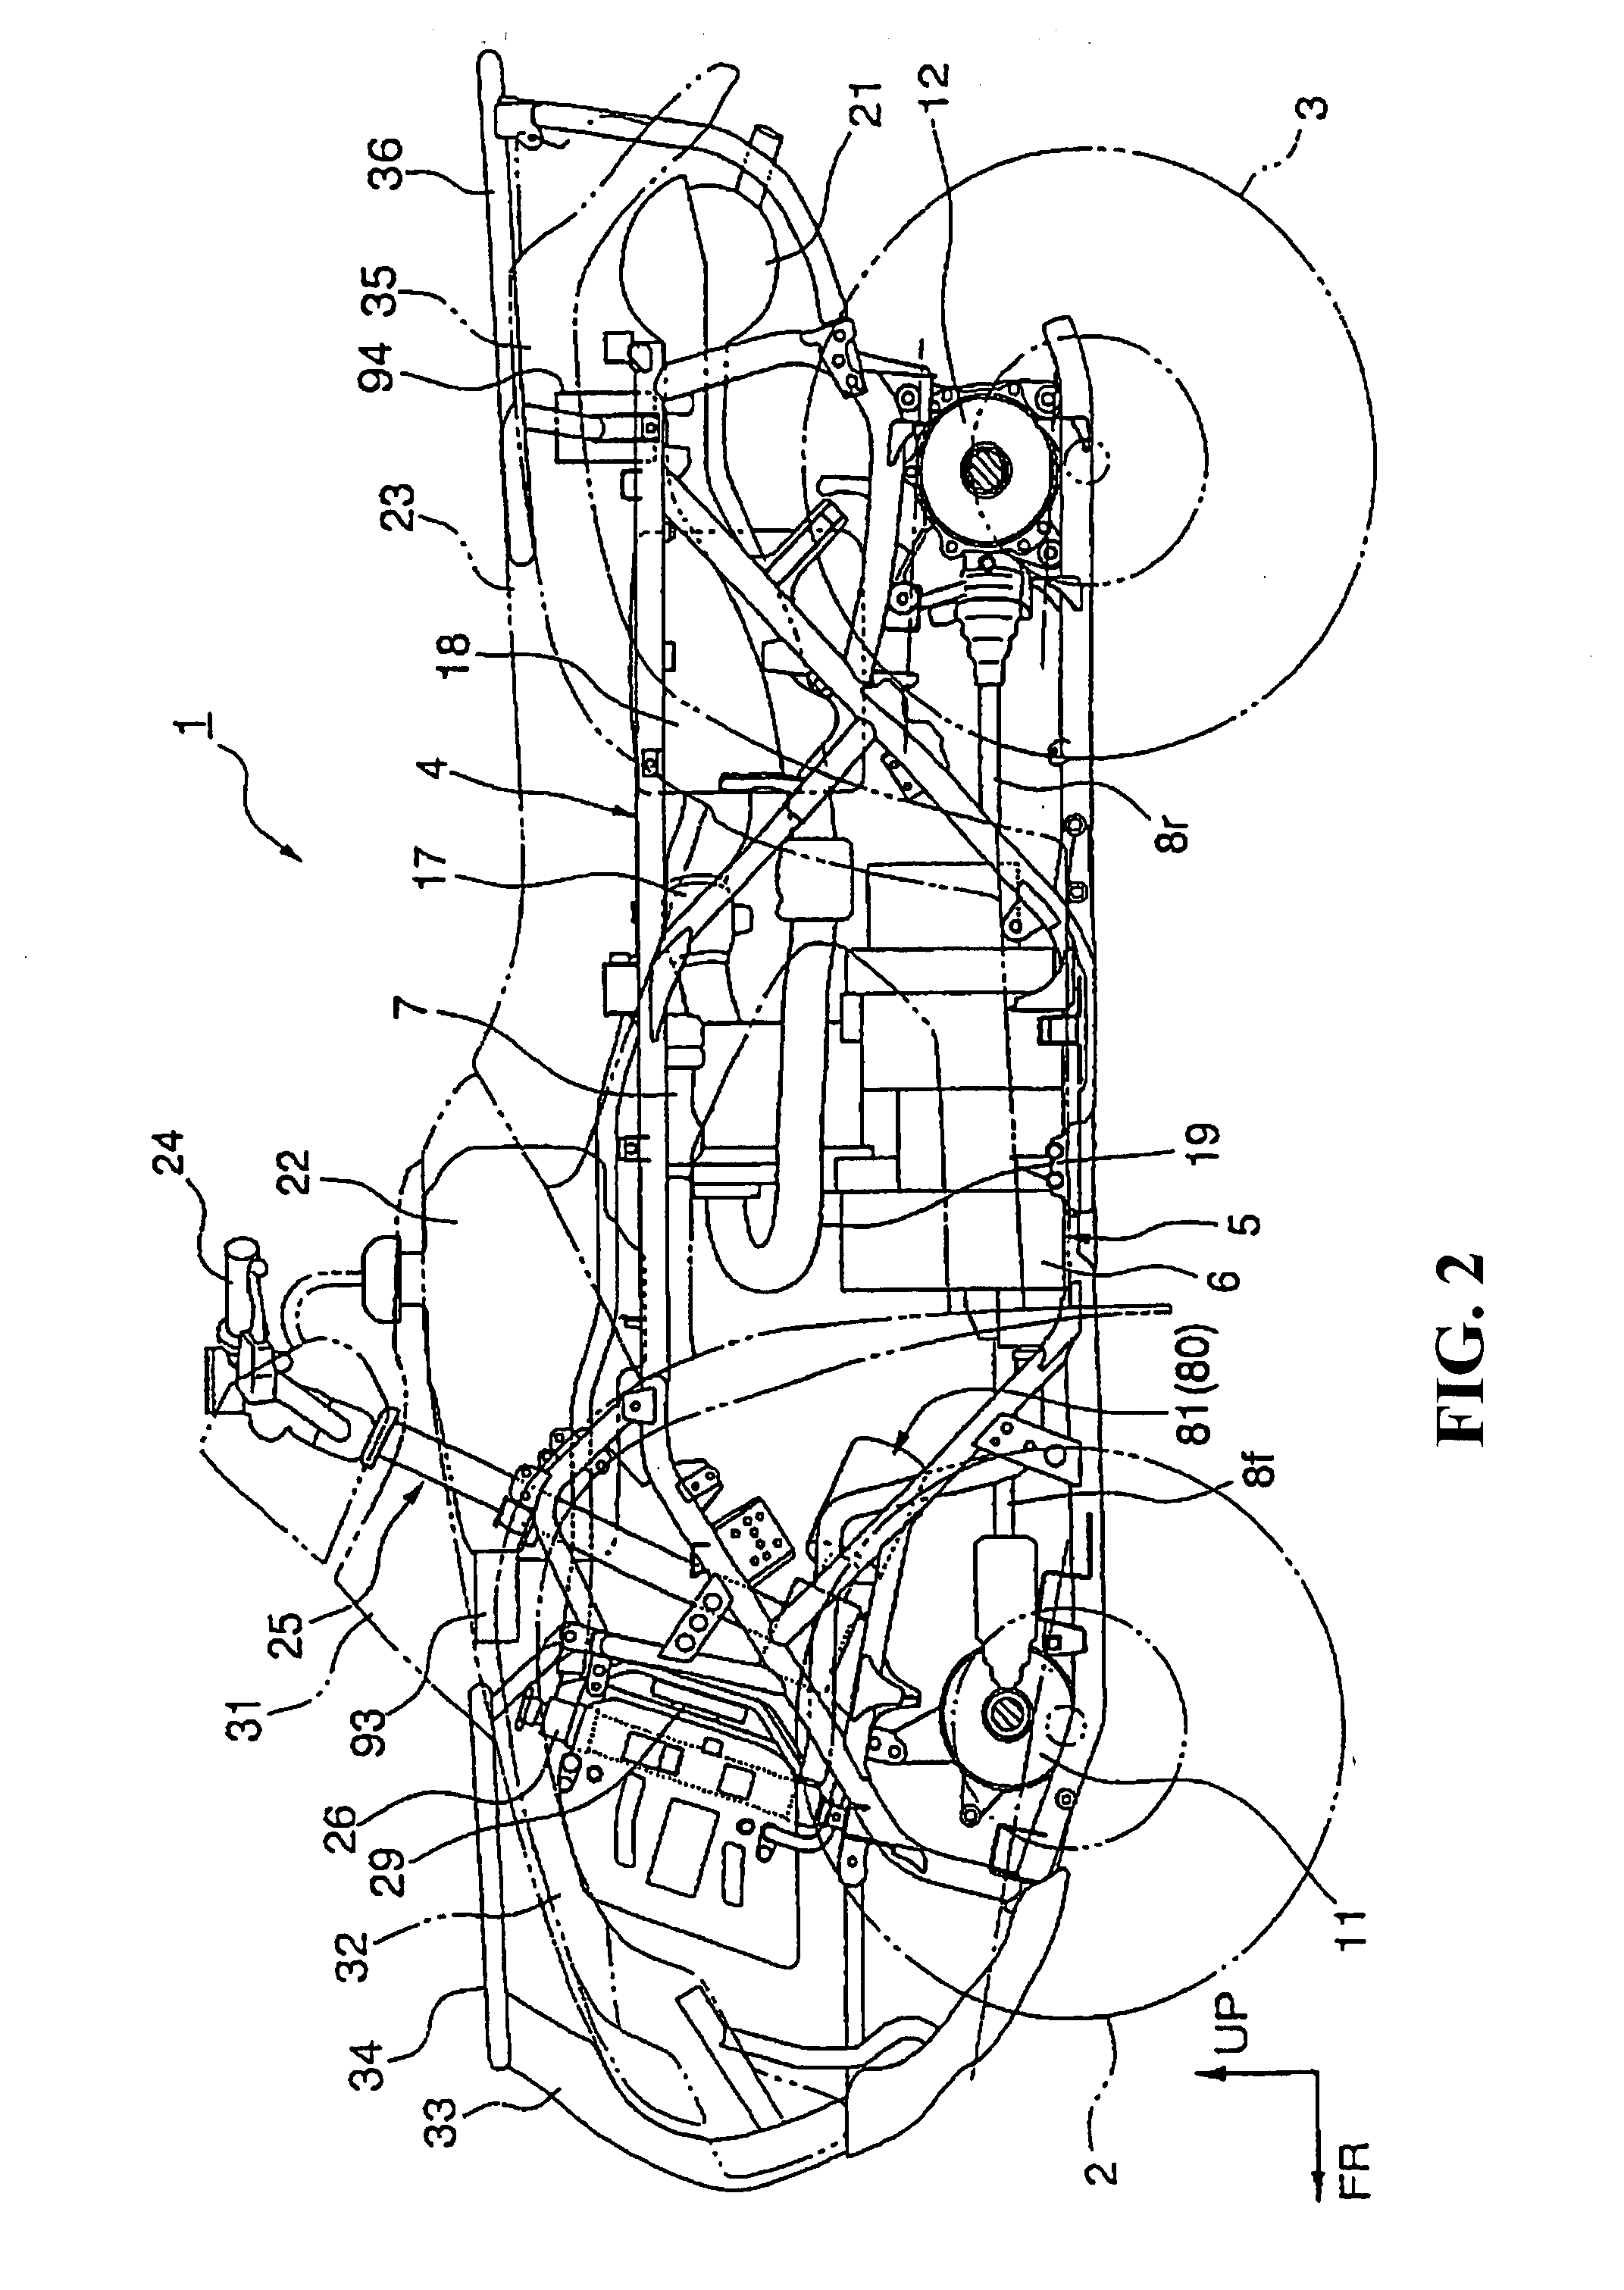 Motor protection system